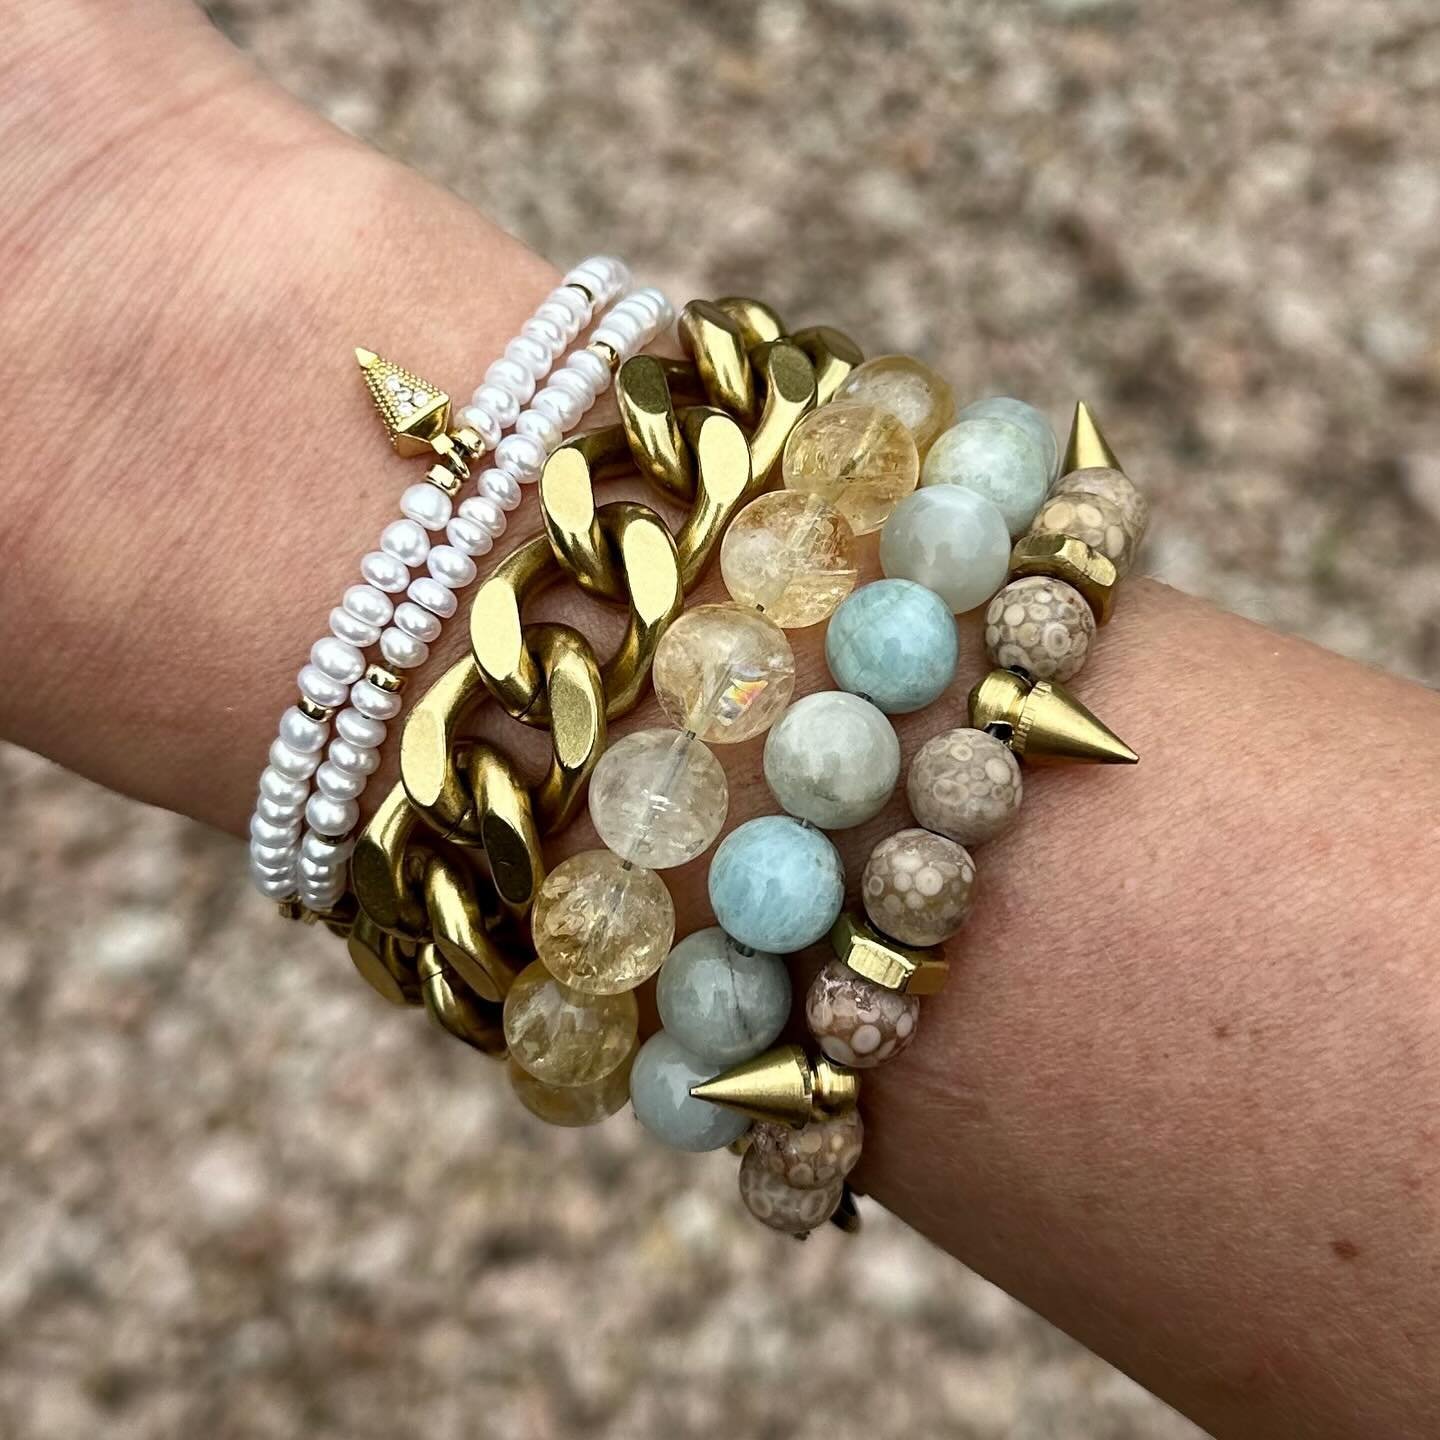 Let&rsquo;s bring in some coastal vibes, shall we? 🌊☀️

We&rsquo;re obsessed with this bracelet stack for your next beach getaway! 

From top to bottom:
Remix Mini Pearl &amp; Art Deco Drop
Chain: Thick Curb 3.0
Remix: Citrine
Remix: Aquamarine
On P